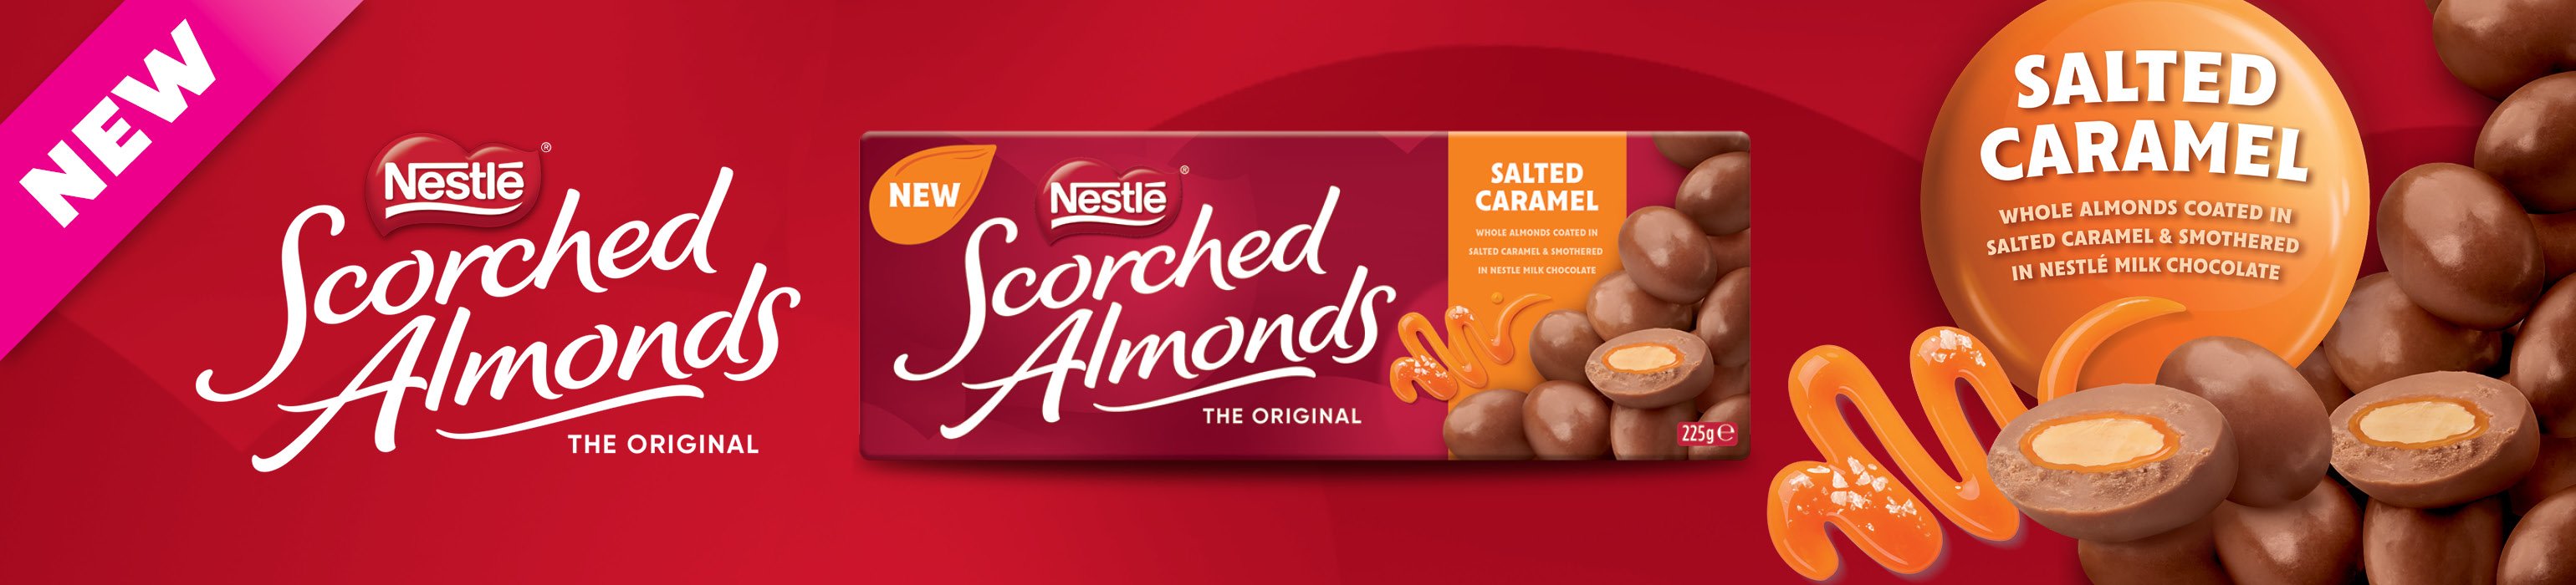 Nestle Scorched Almonds, New Salted Caramel Flavour